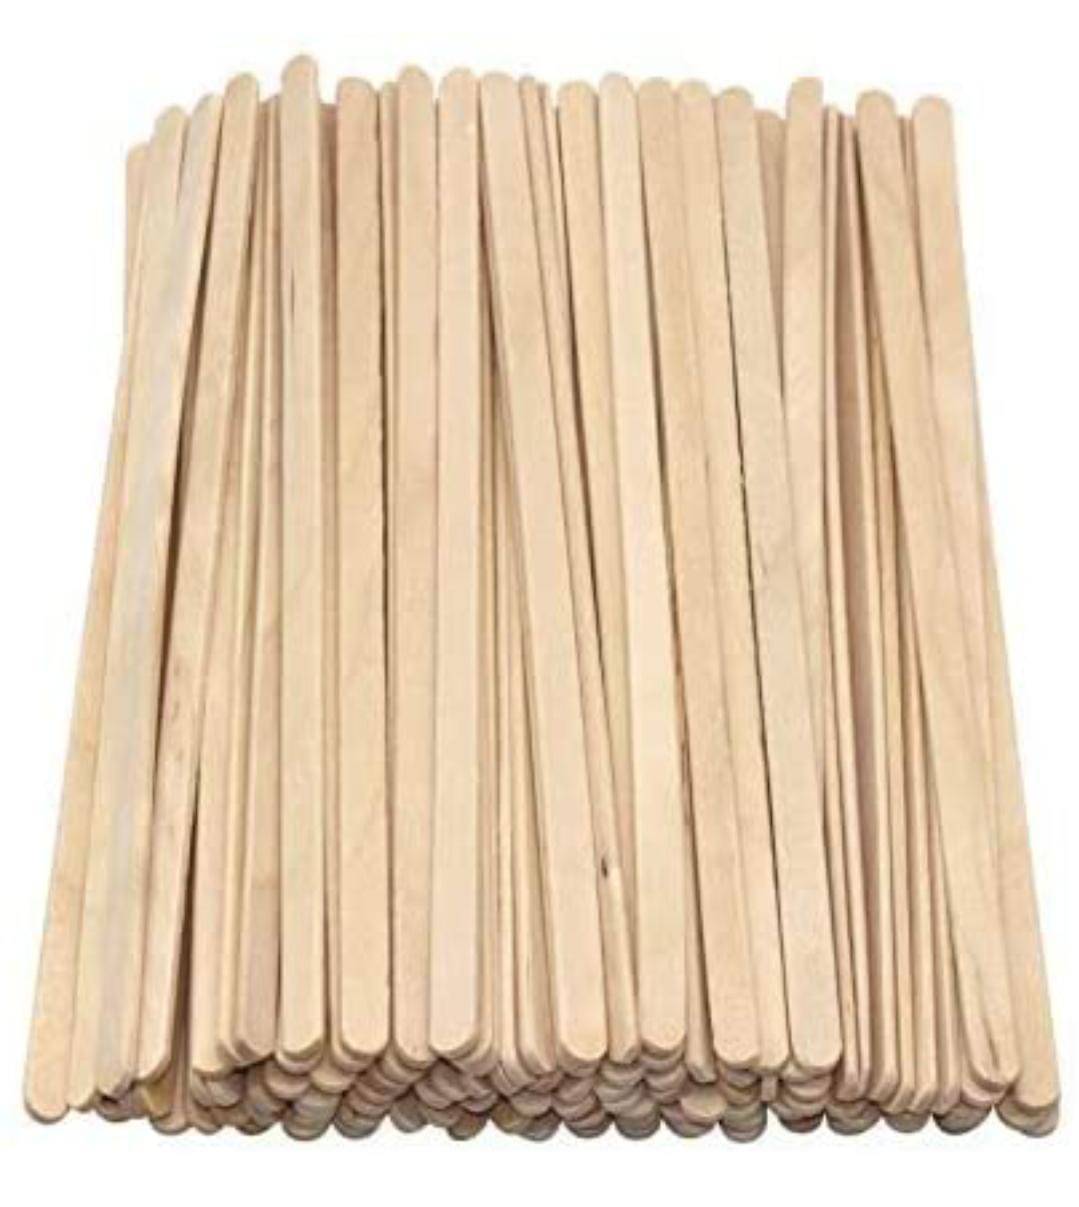 Wooden Stick for Cake Toppers 
Pack of 100